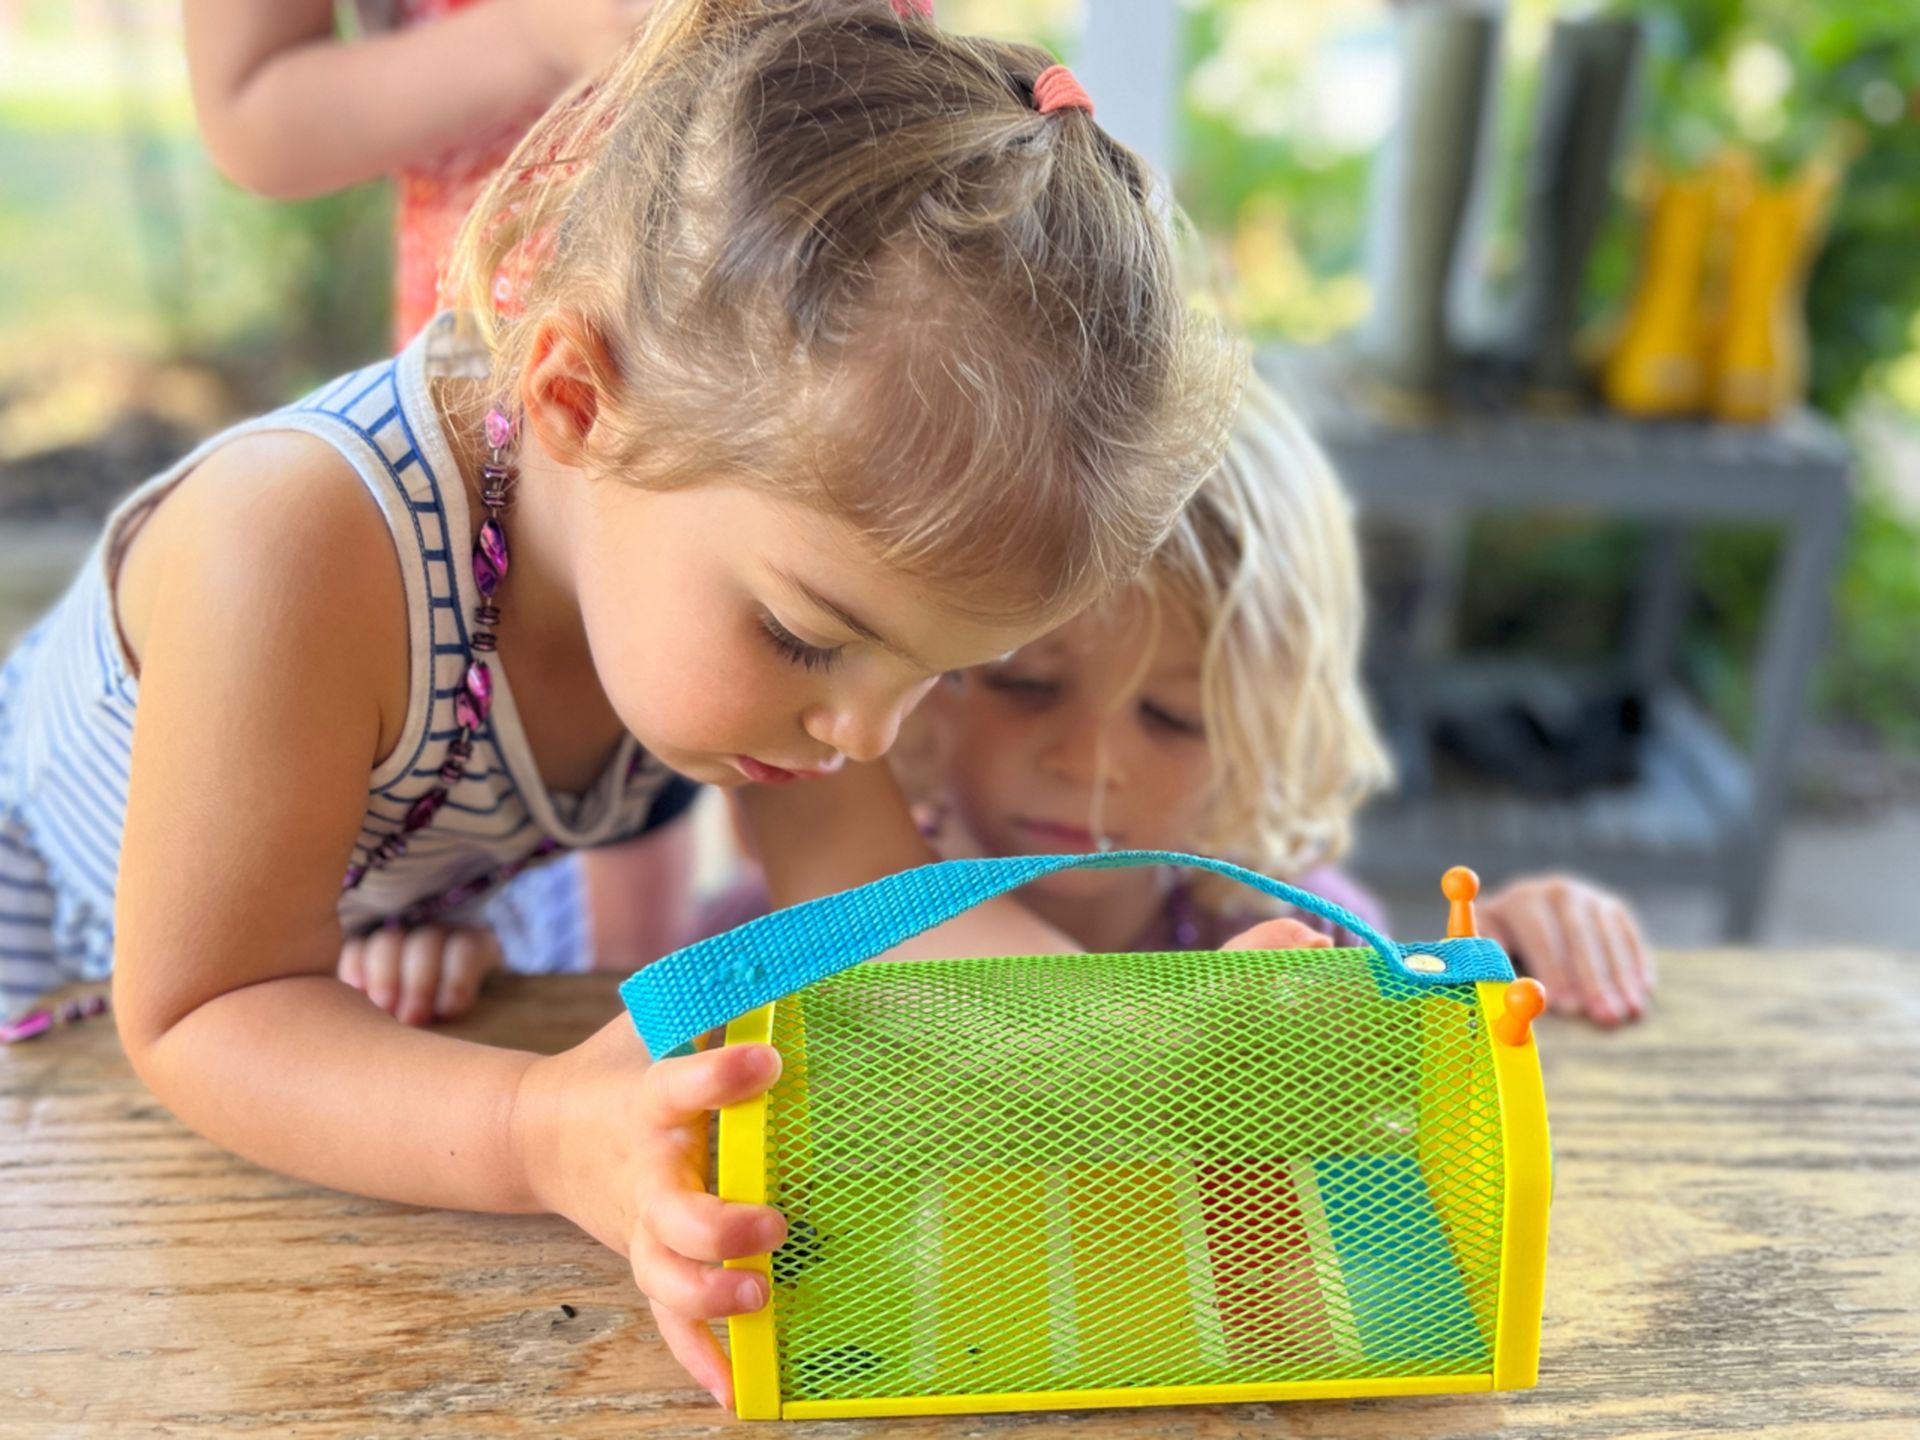 Two Montessori little girls are playing with a yellow and green toy